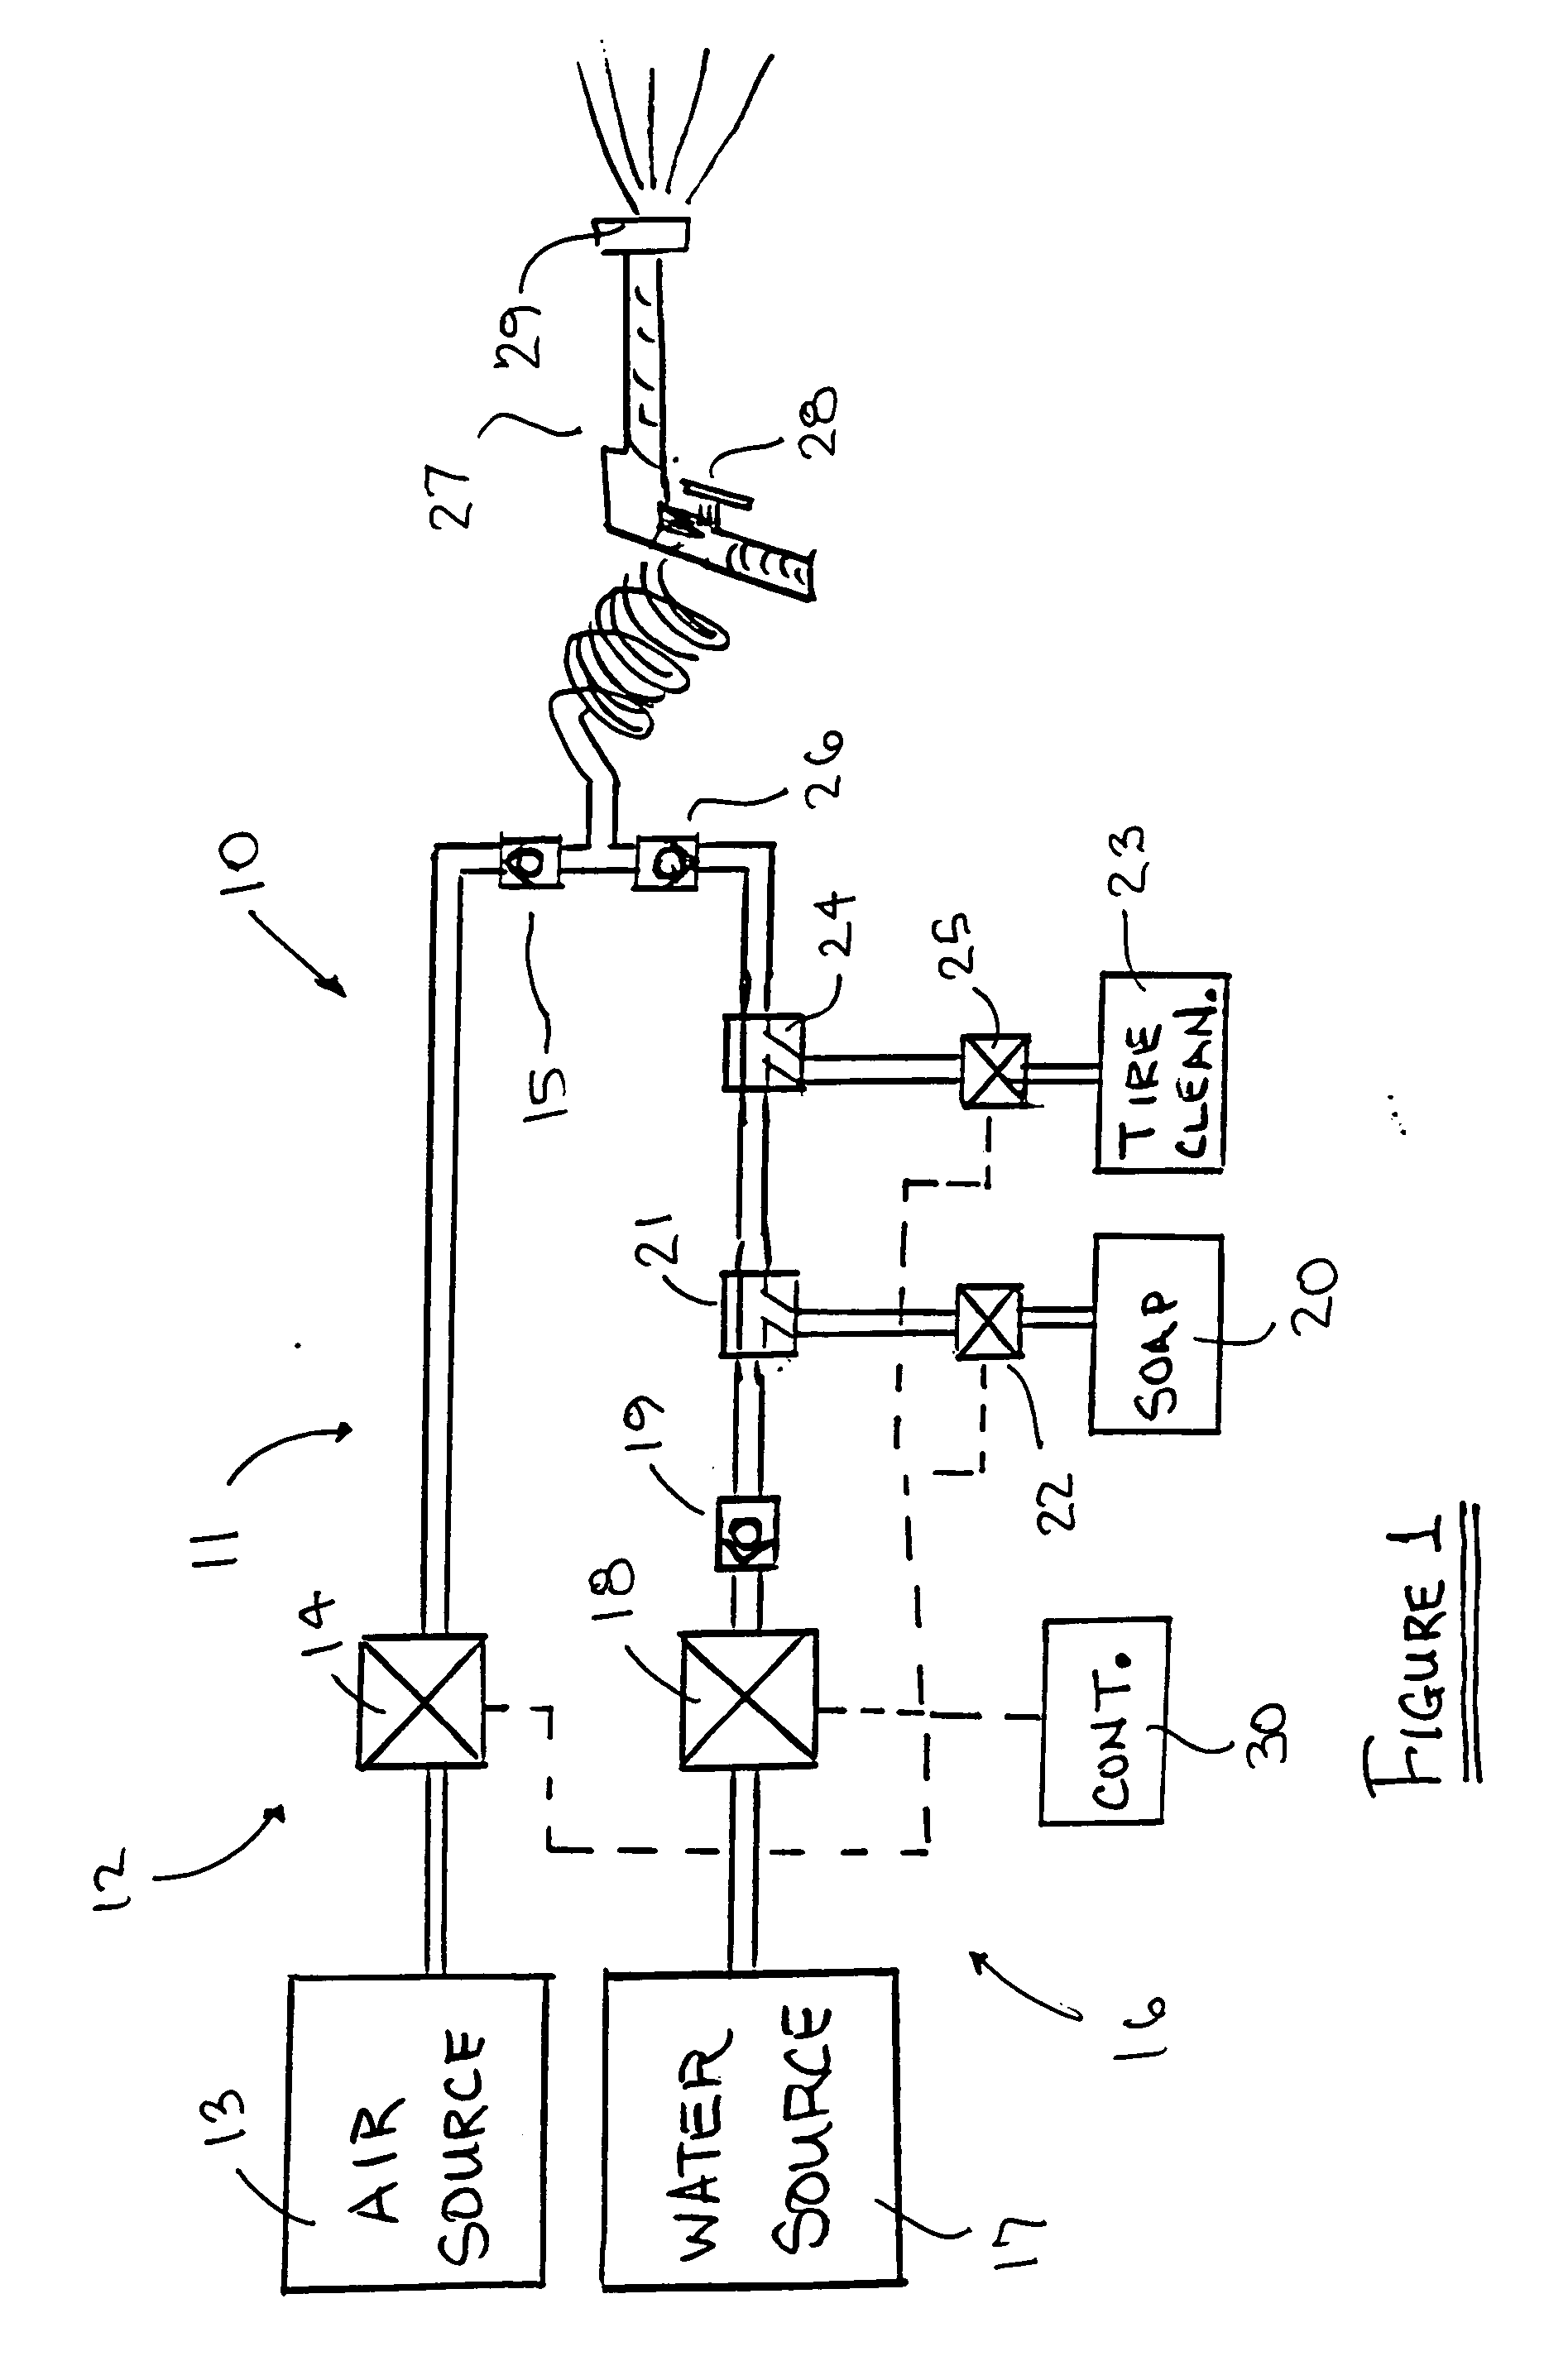 Method and apparatus for drying automobile at self-service carwash